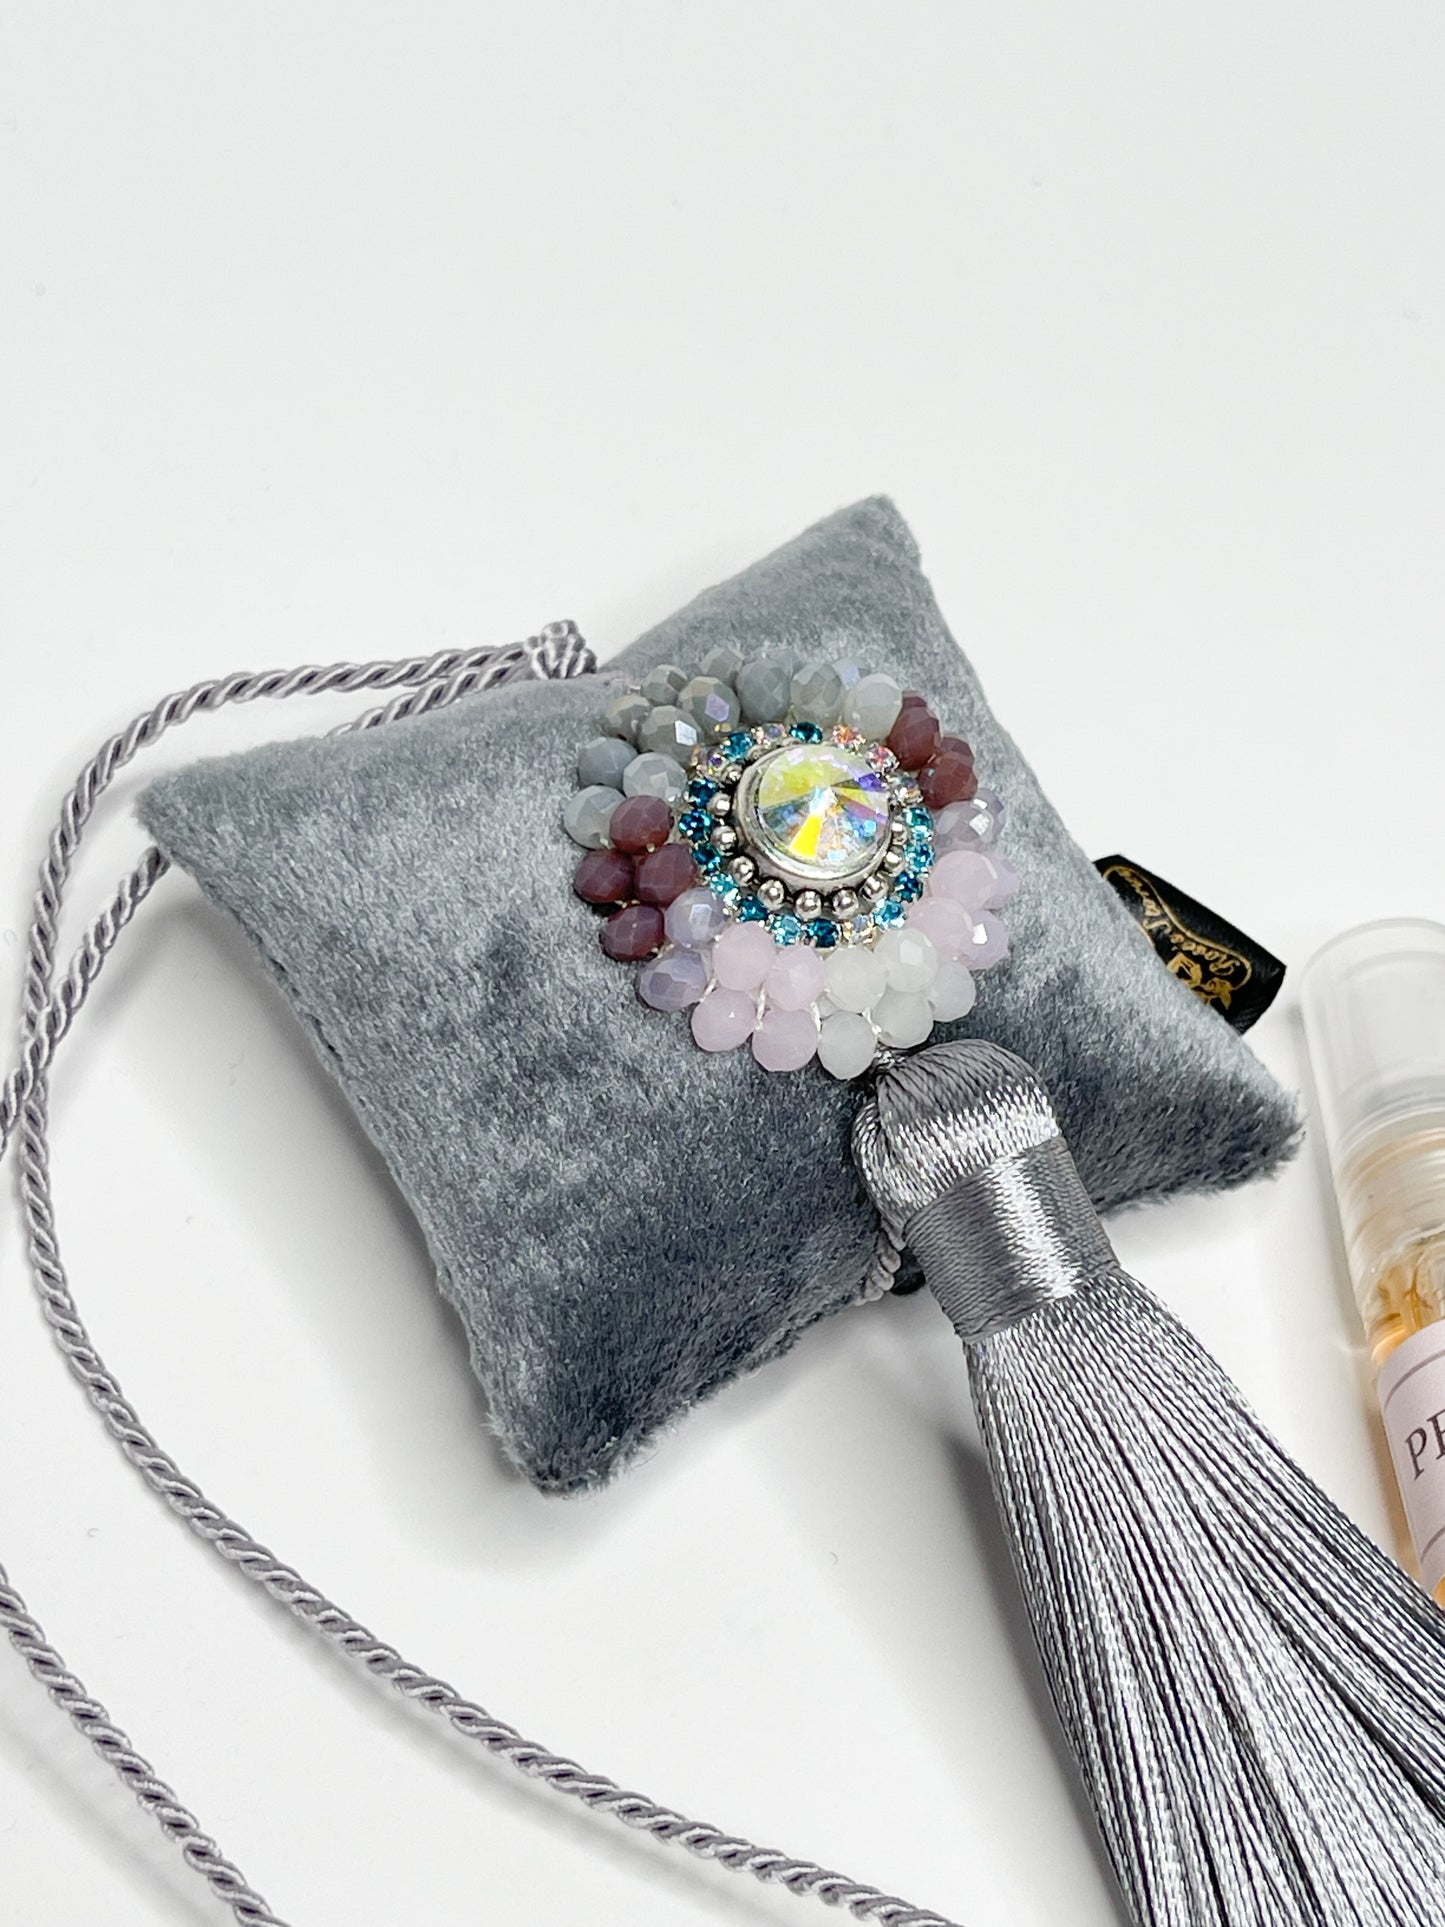 Hanging fragrance with sparkling crystals